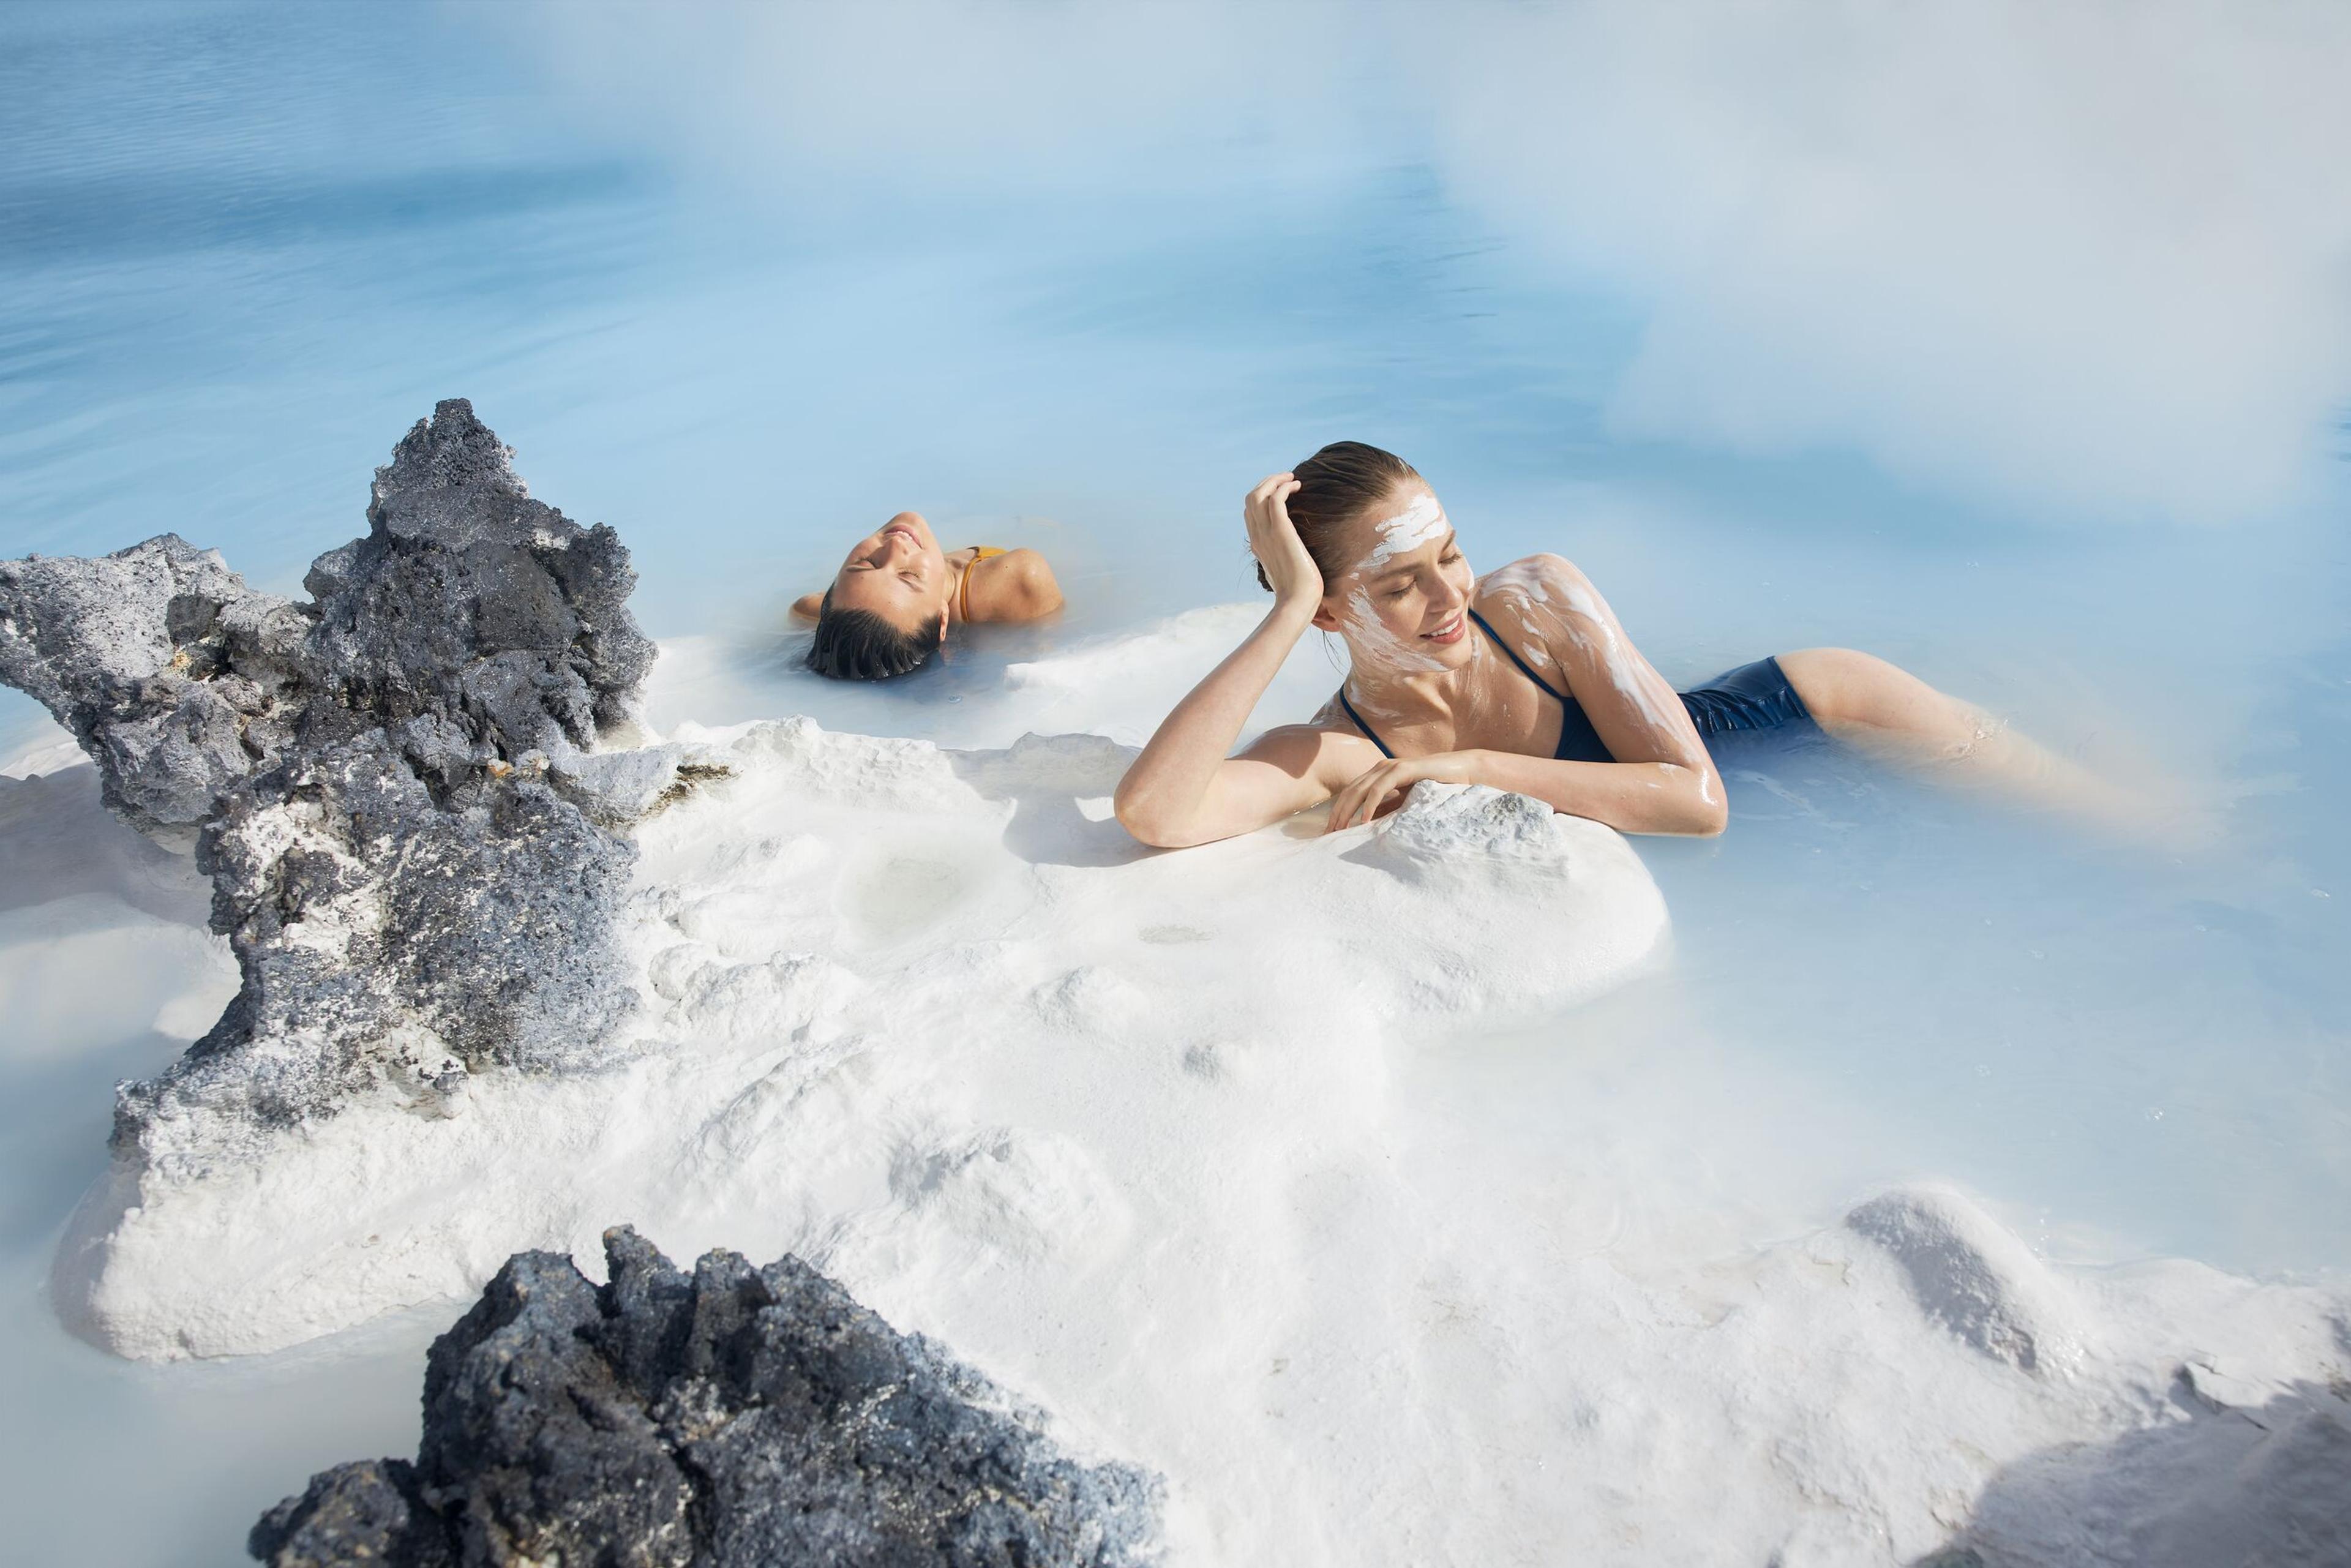 Two people bathing in the silica waters at Blue Lagoon, Iceland.